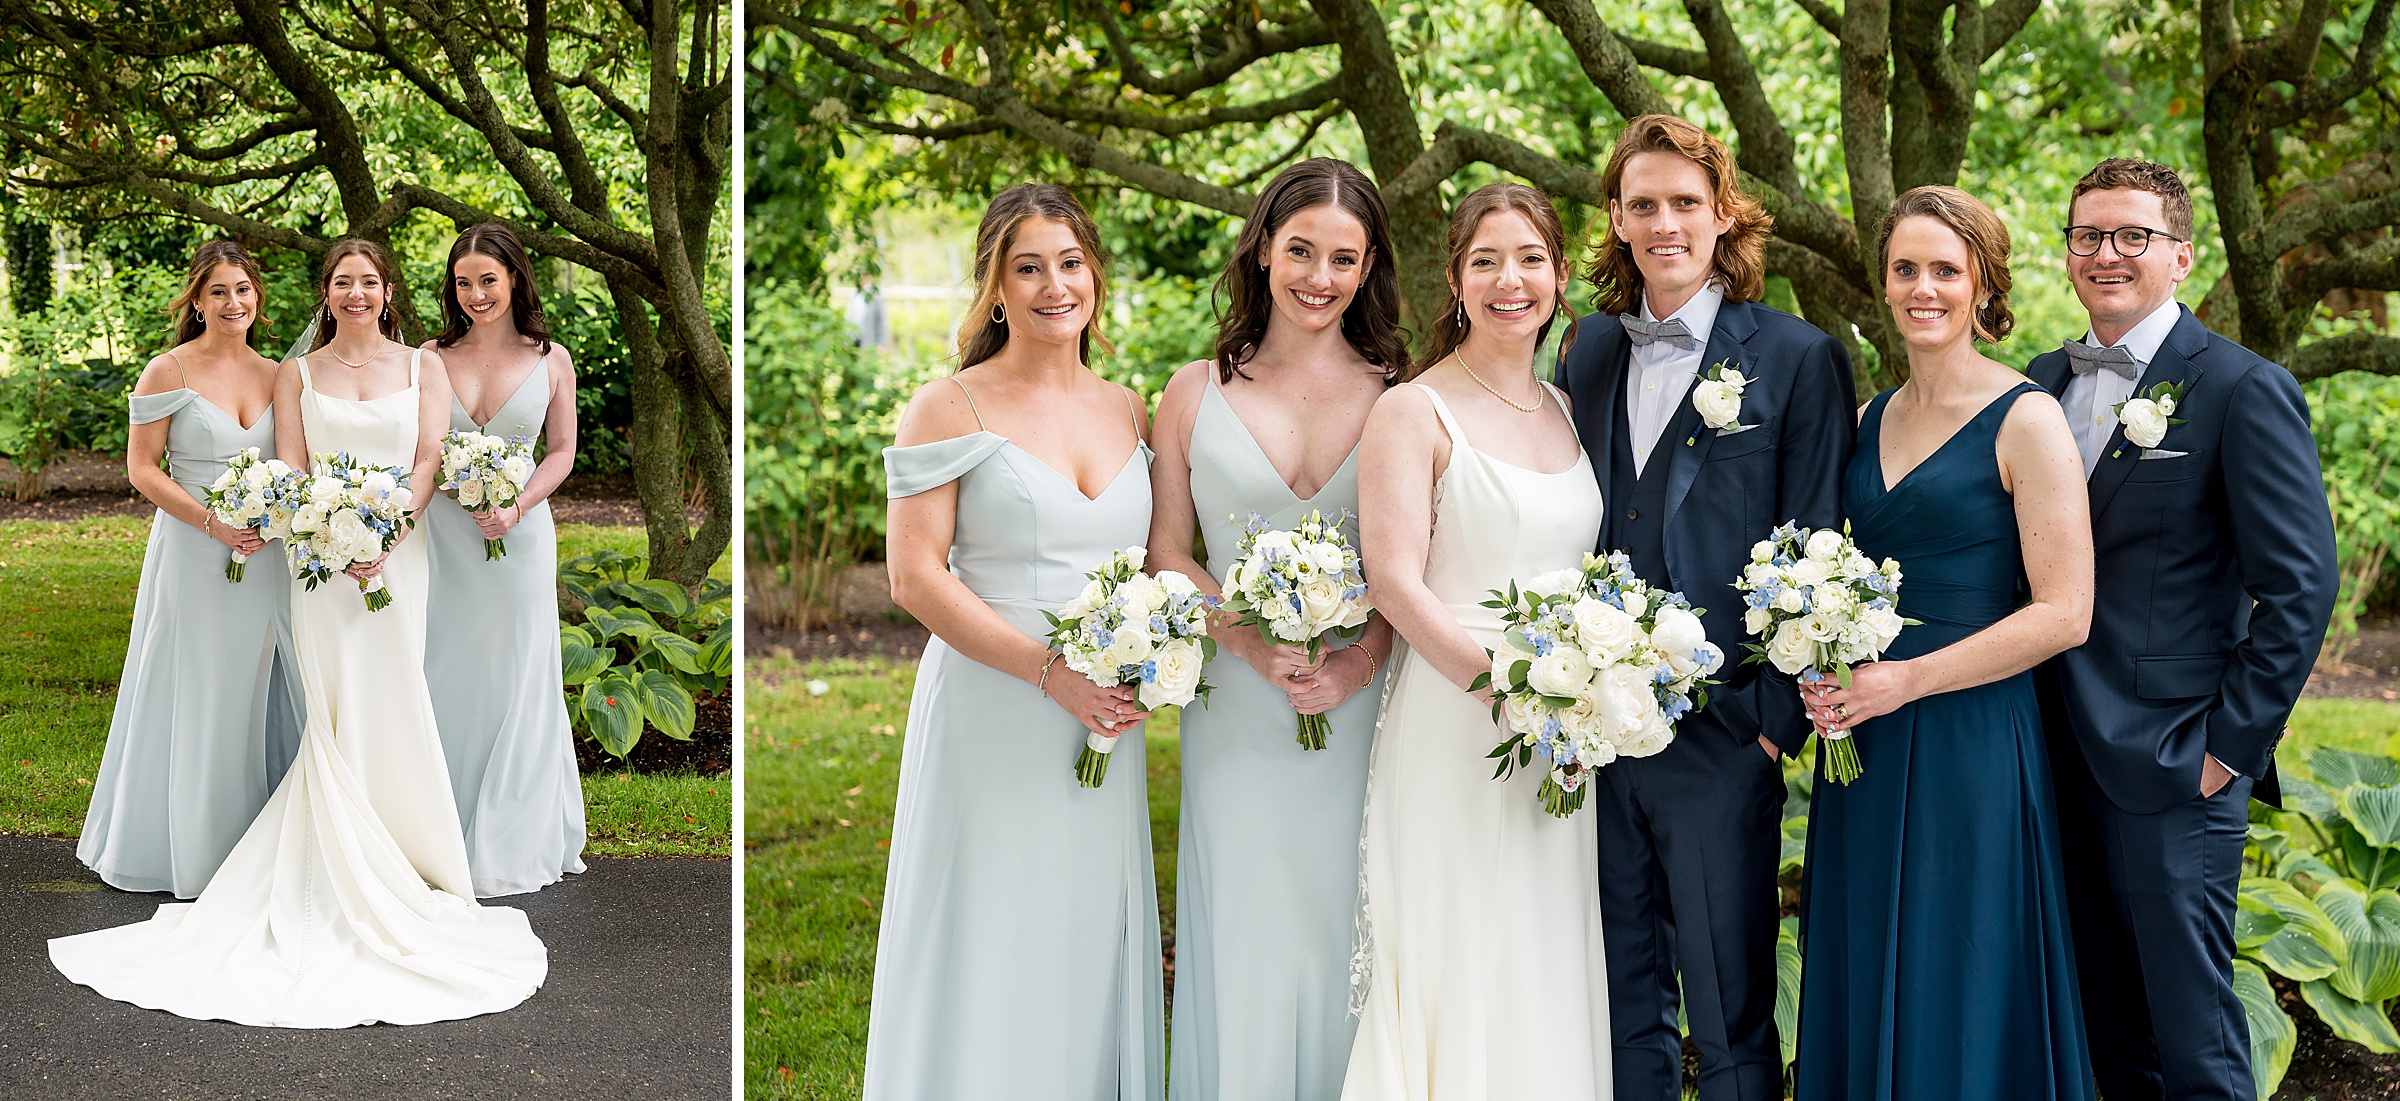 Two photos of a wedding party. In the first, three bridesmaids and the bride hold bouquets. In the second, the group includes the bride, two bridesmaids, the groom, and two groomsmen.